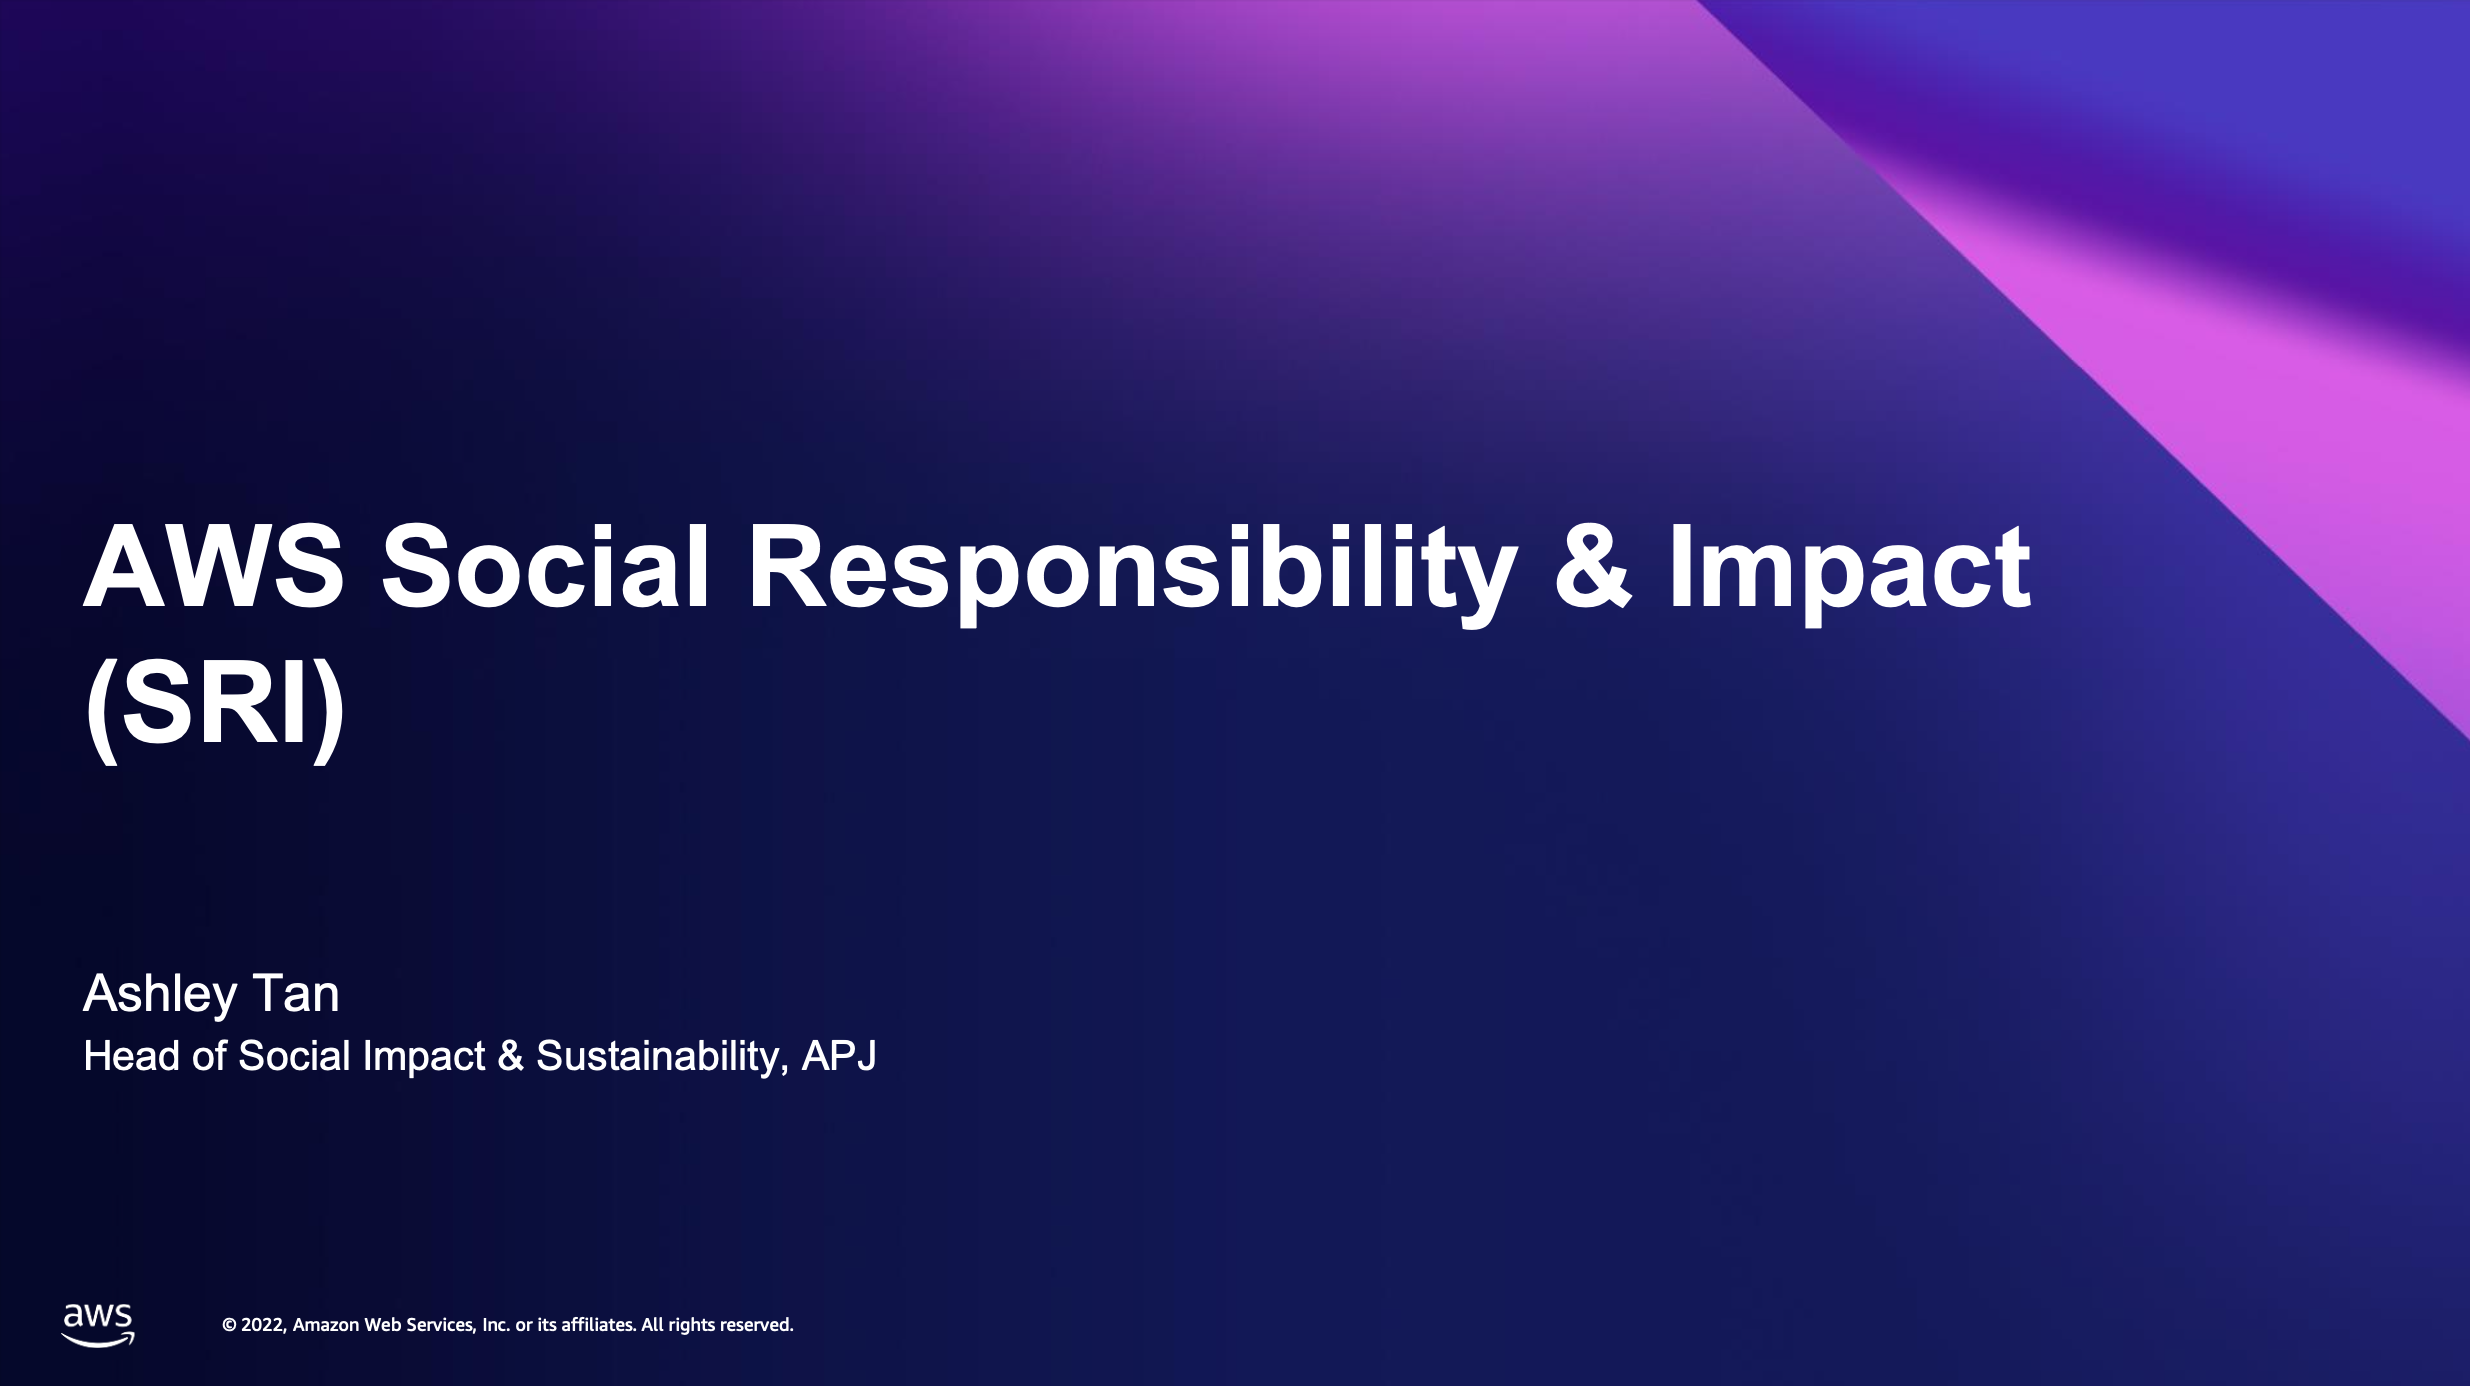 AWS Social Responsibility and Impact for Smart Cities